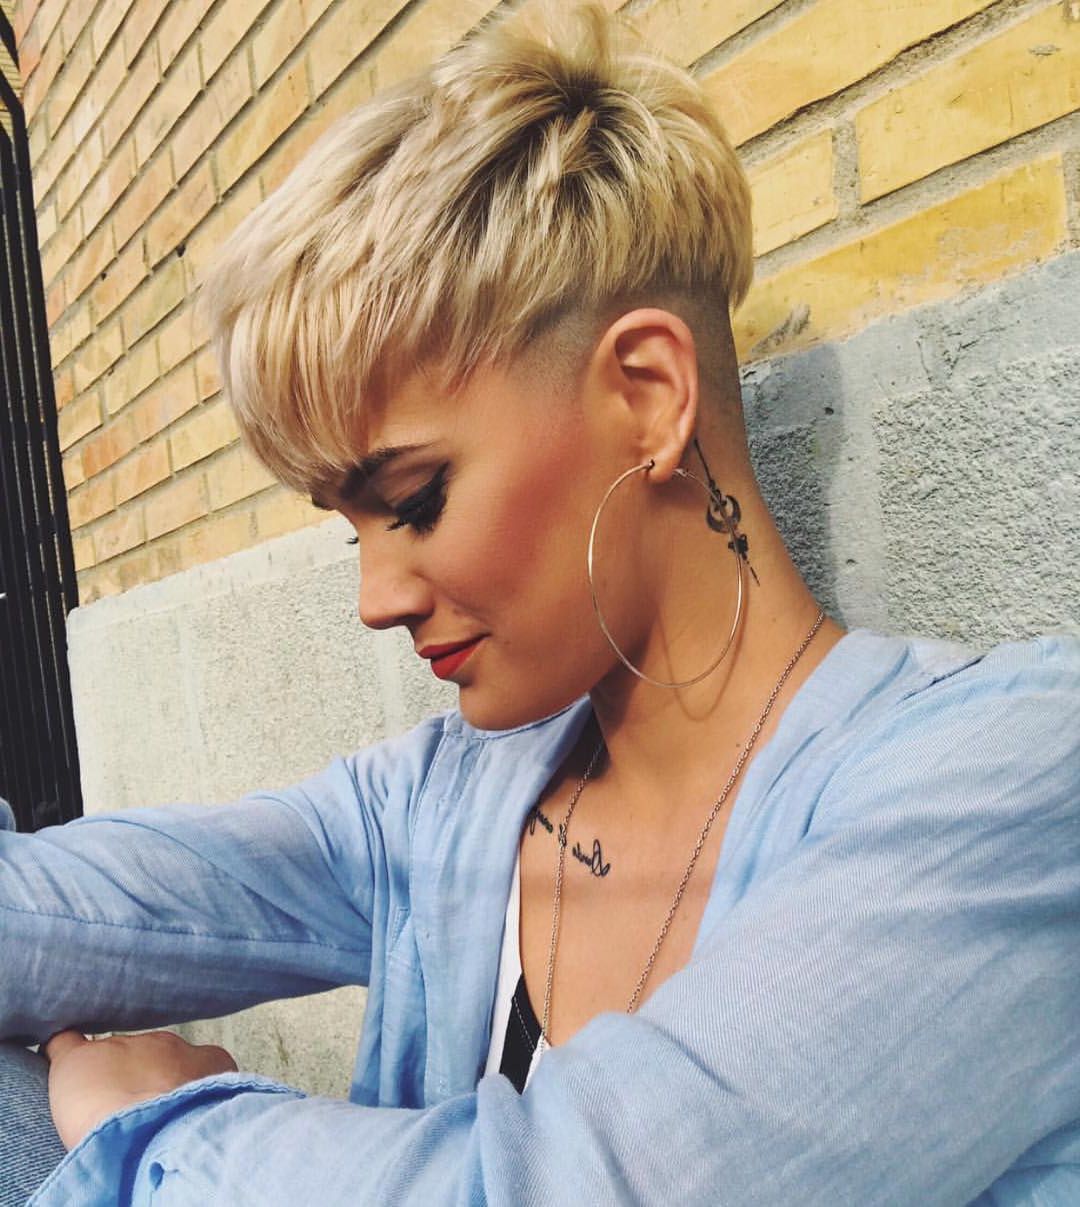 10 Stylish Pixie Haircuts – Women Short Undercut Hairstyles 2018 – 2019 Intended For Curly Pixie Hairstyles With V Cut Nape (View 12 of 25)